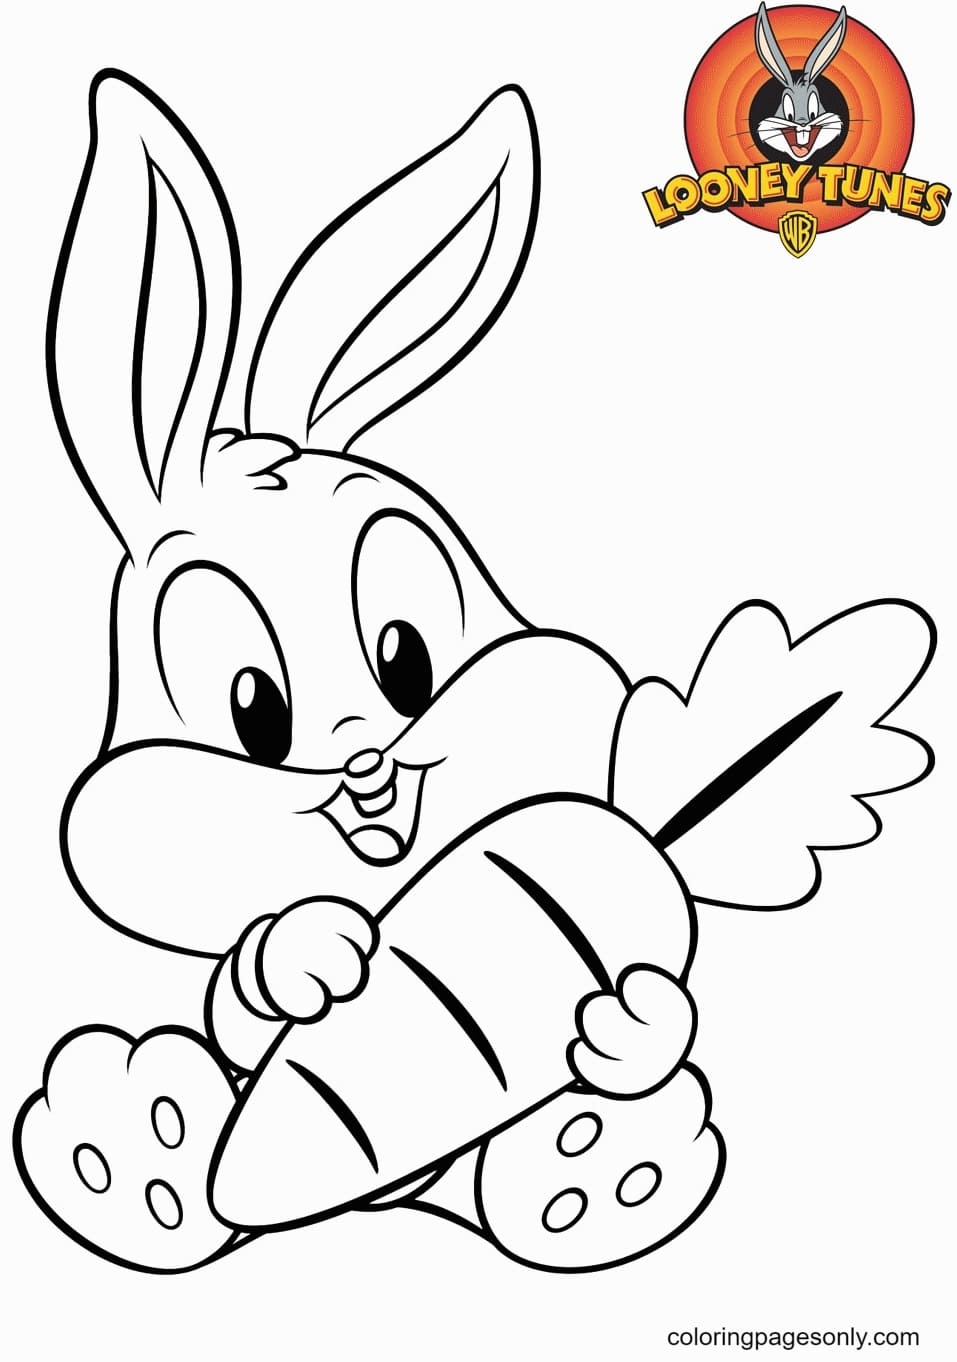 Cute Cartoon Bunnies Coloring Pages - Cute Bunnies Coloring Pages - Coloring  Pages For Kids And Adults